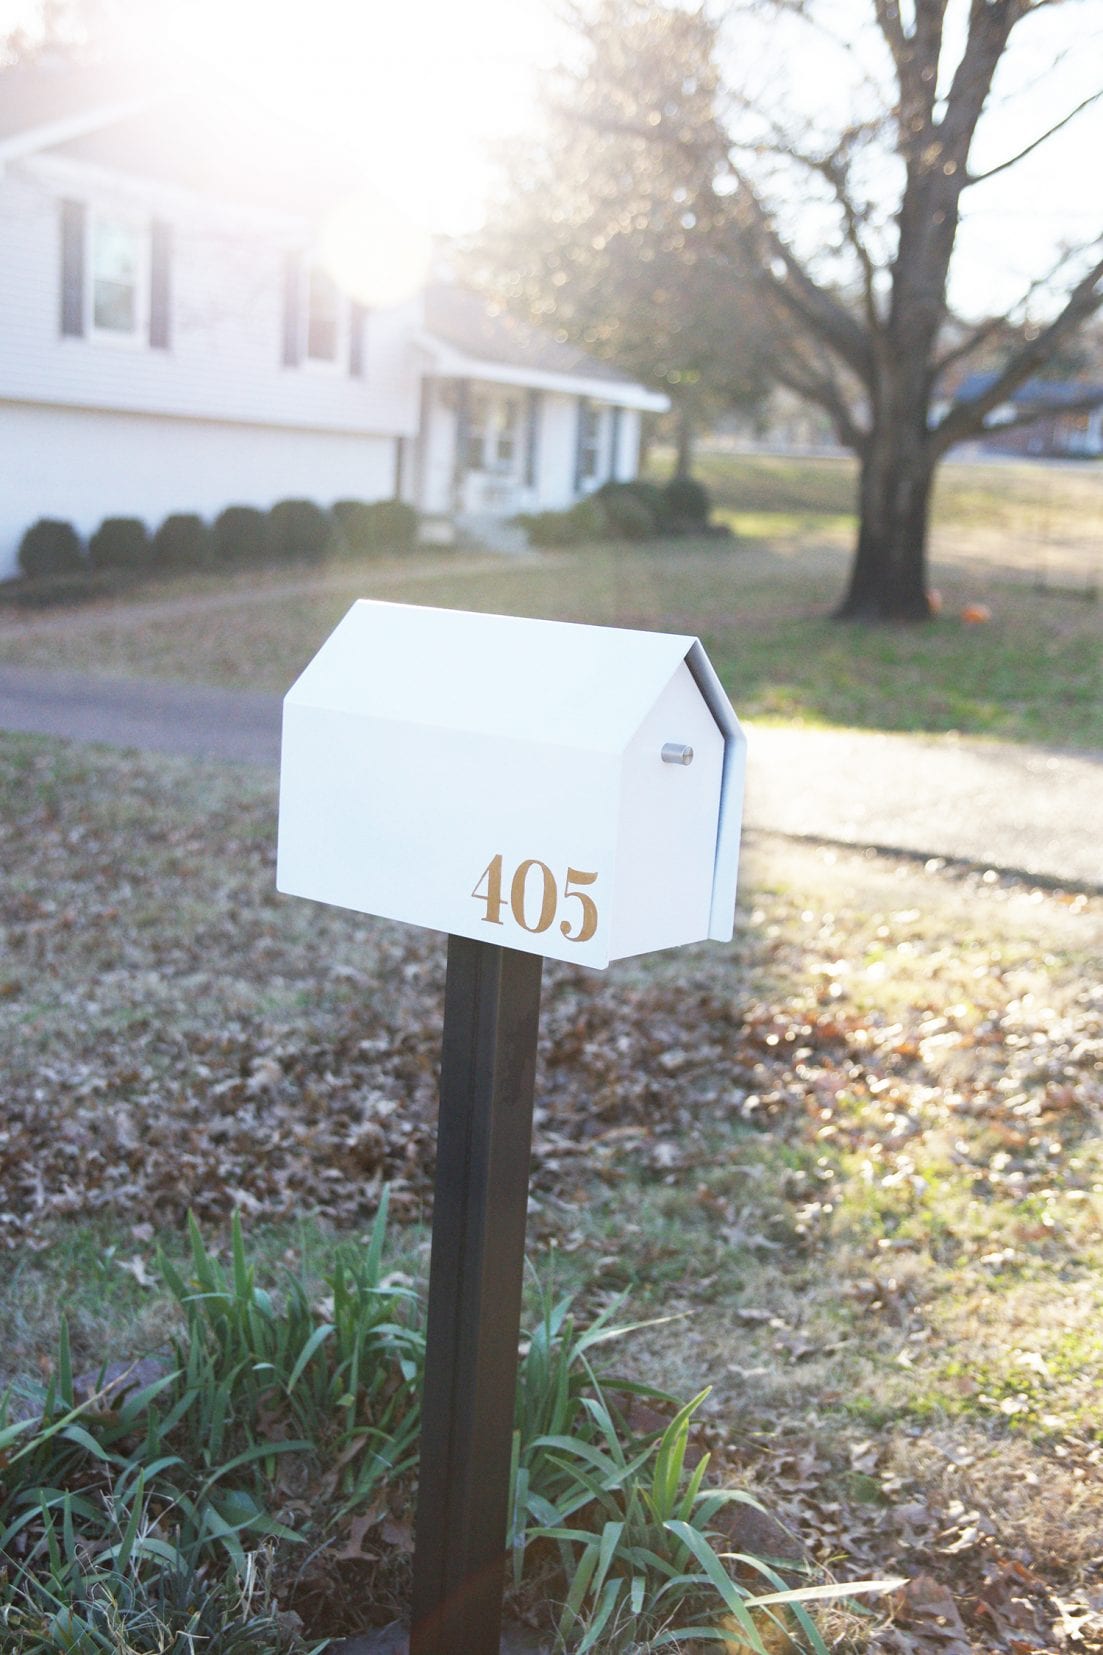 adding curb appeal - mailbox makeover